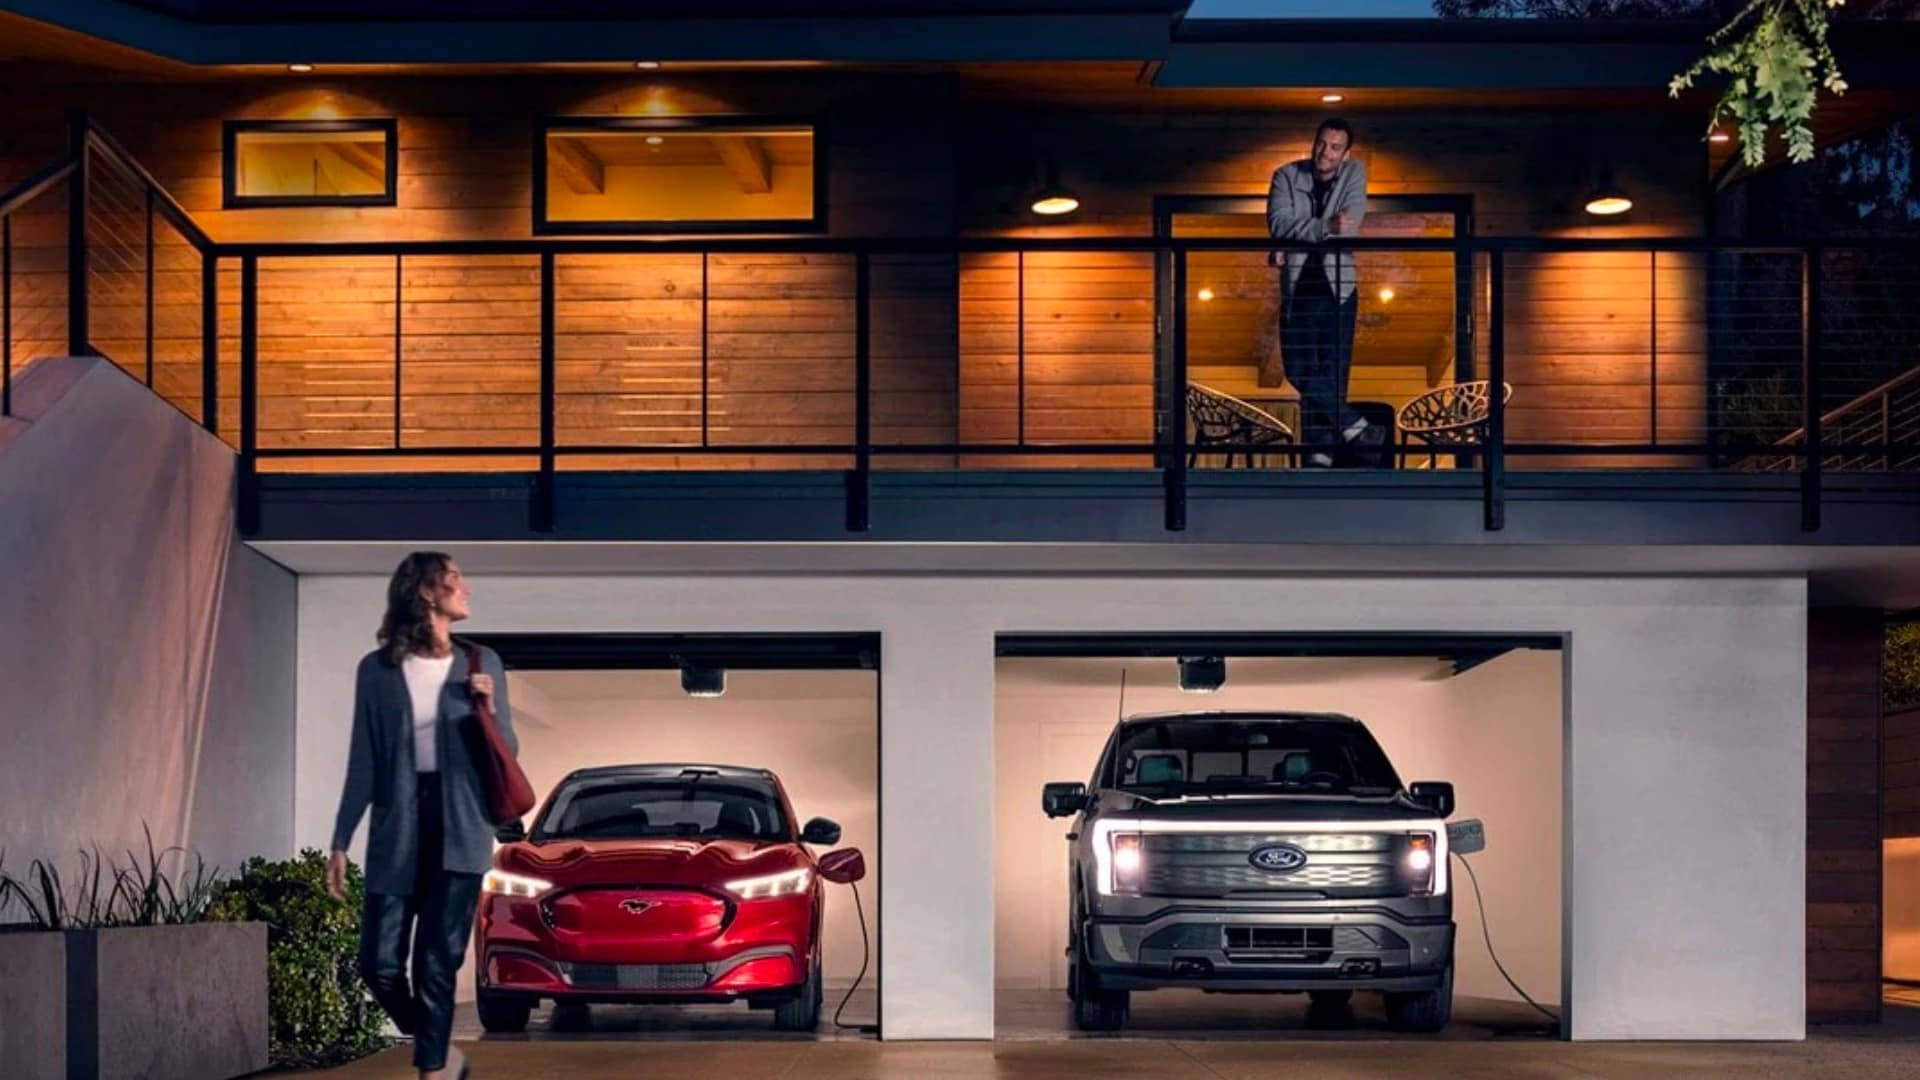 A 2022 Ford Mustang Mach-E and a Ford F-150 Lightning are being charged in a garage at night while a man stands on a balcony looking at awoman below, who is looking back at the man.